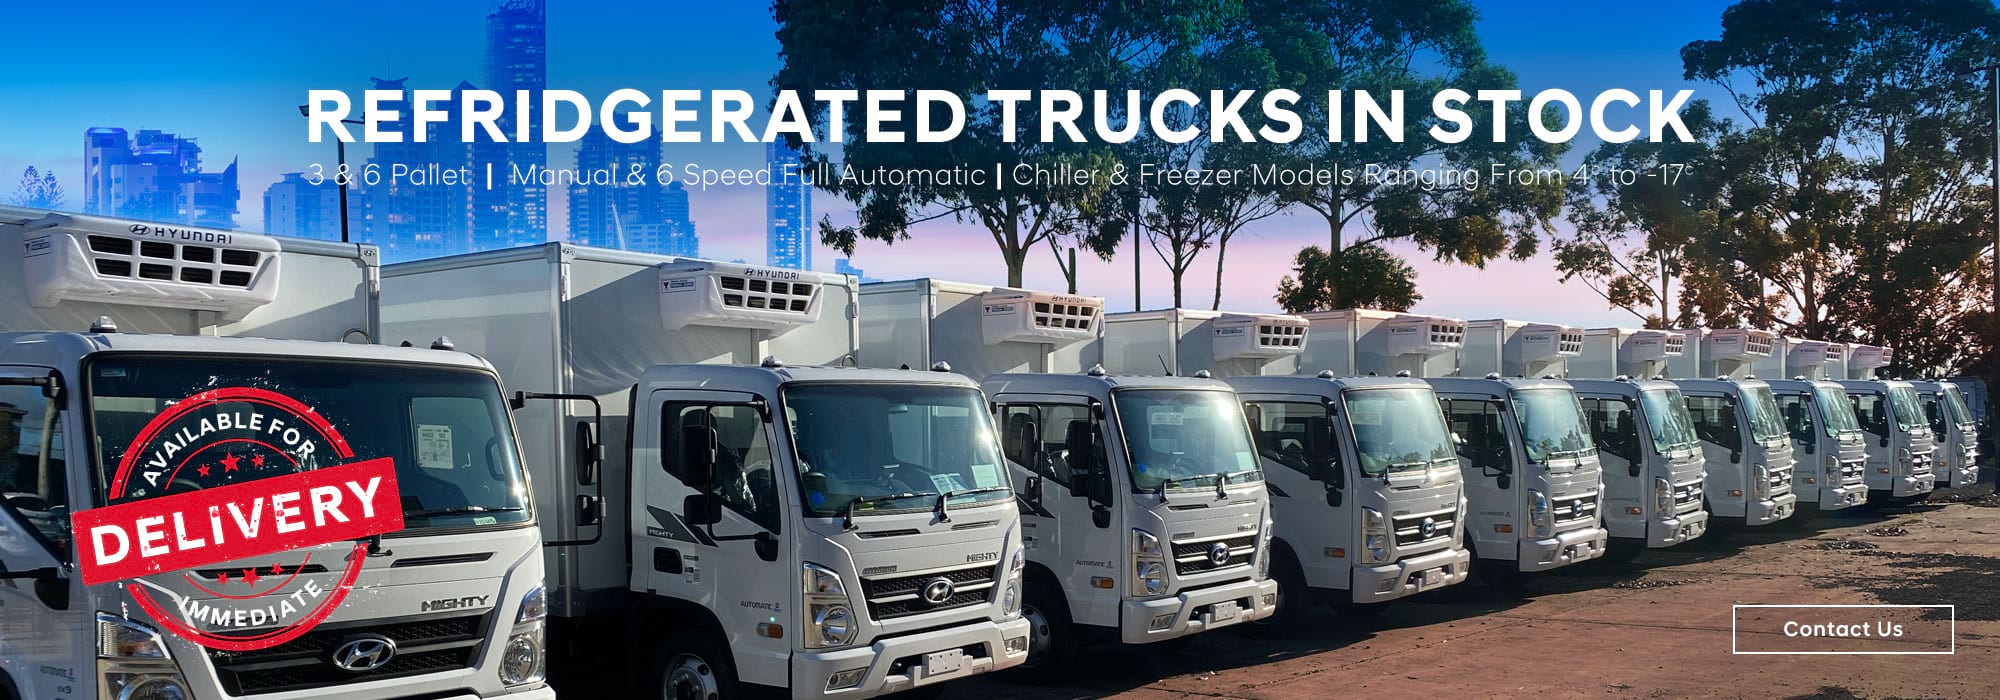 Refrigerated Trucks in stock